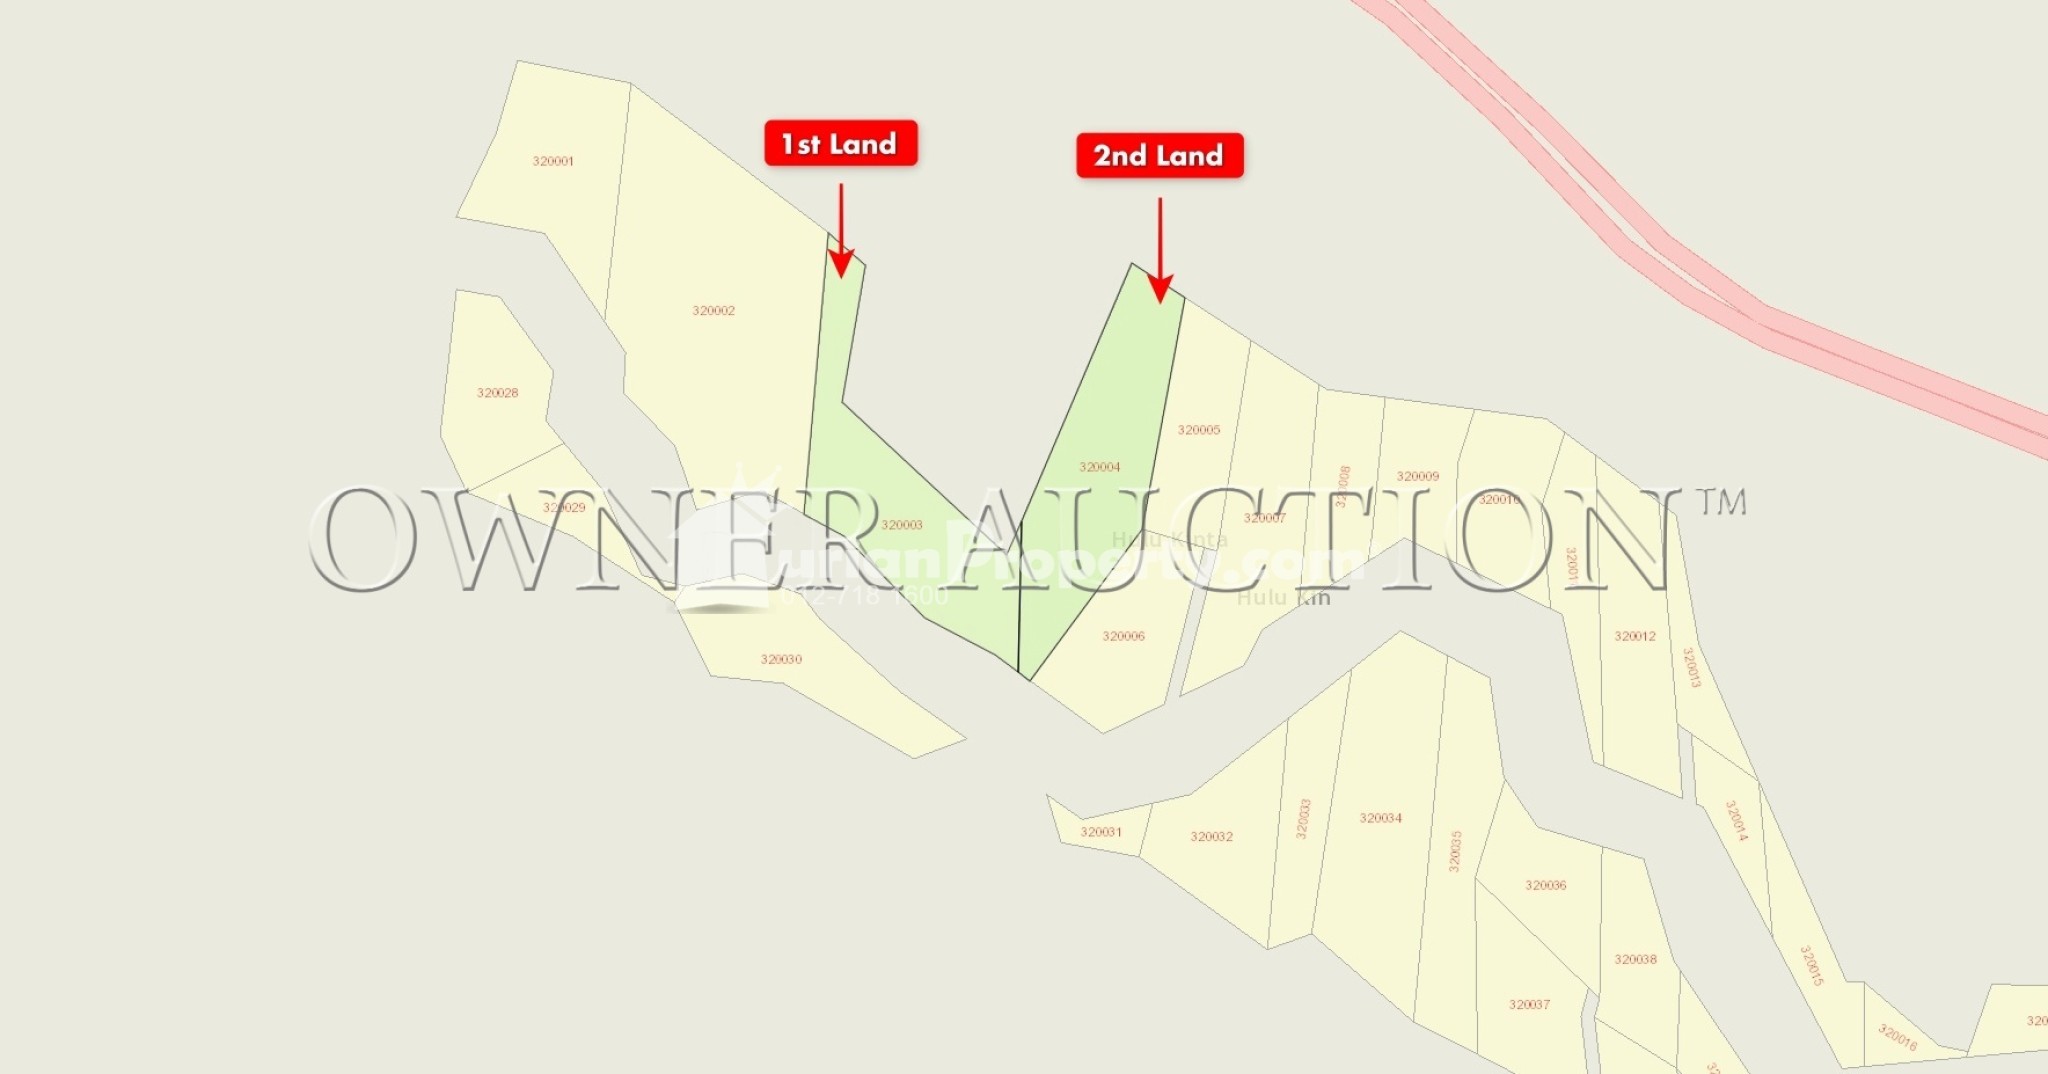 Agriculture Land For Auction at Ulu Kinta